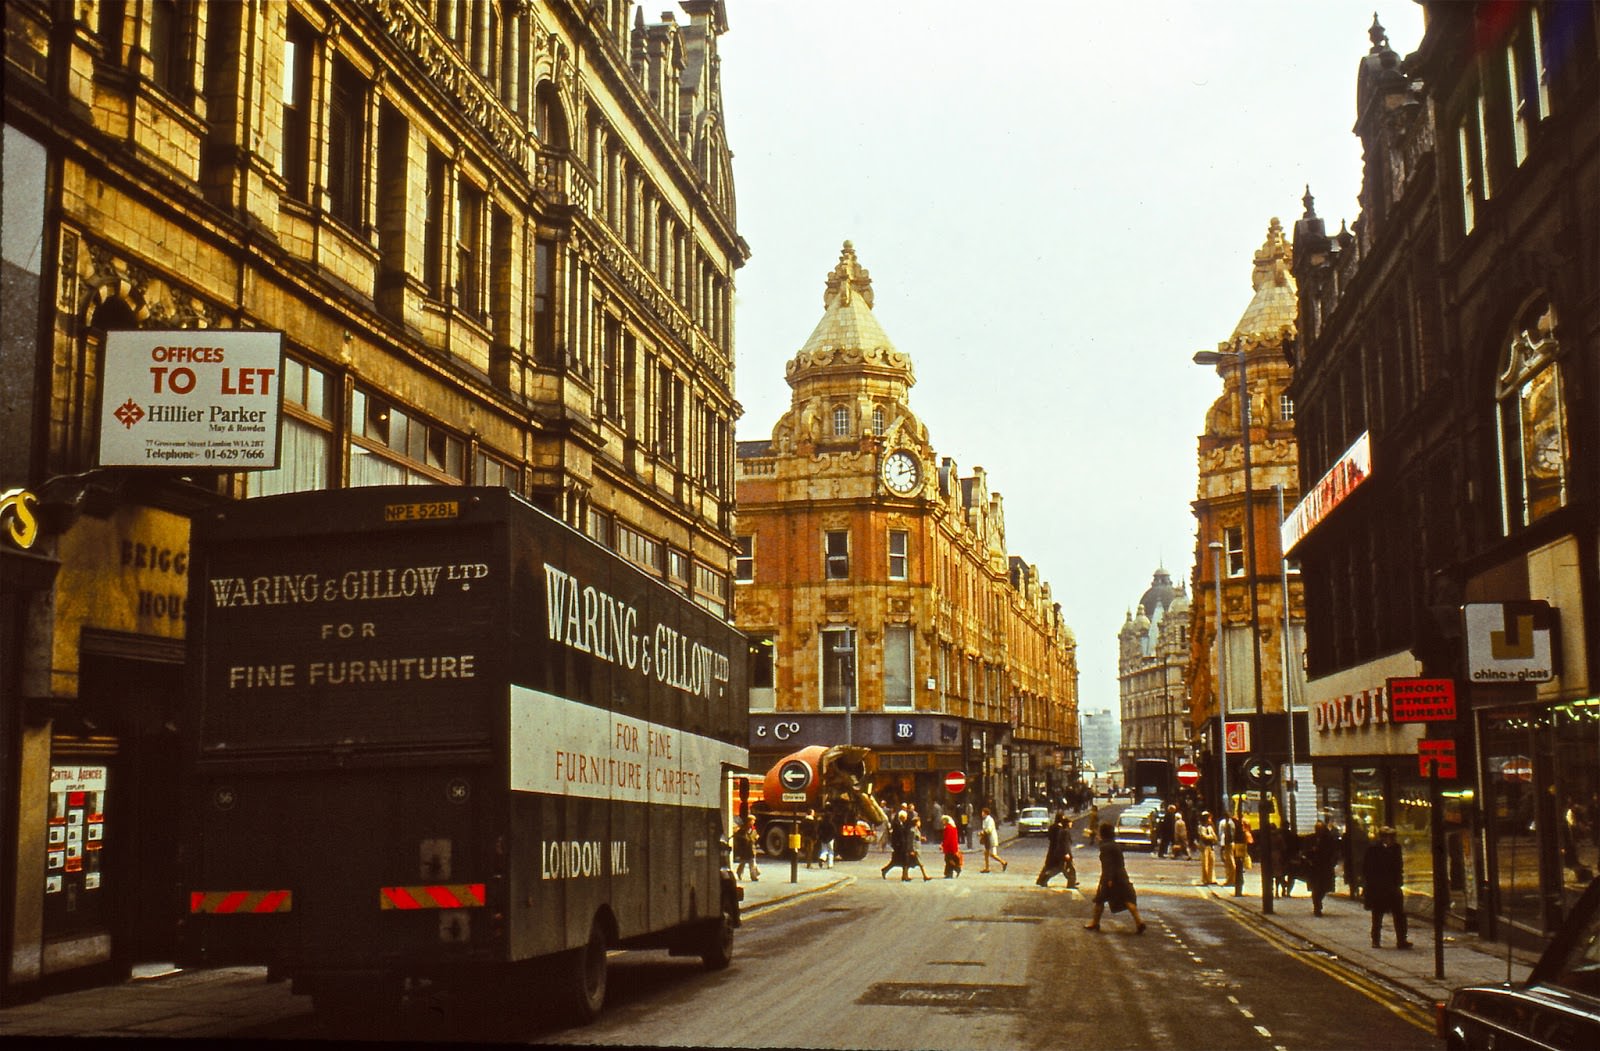 Albion Place looking east towards Briggate.